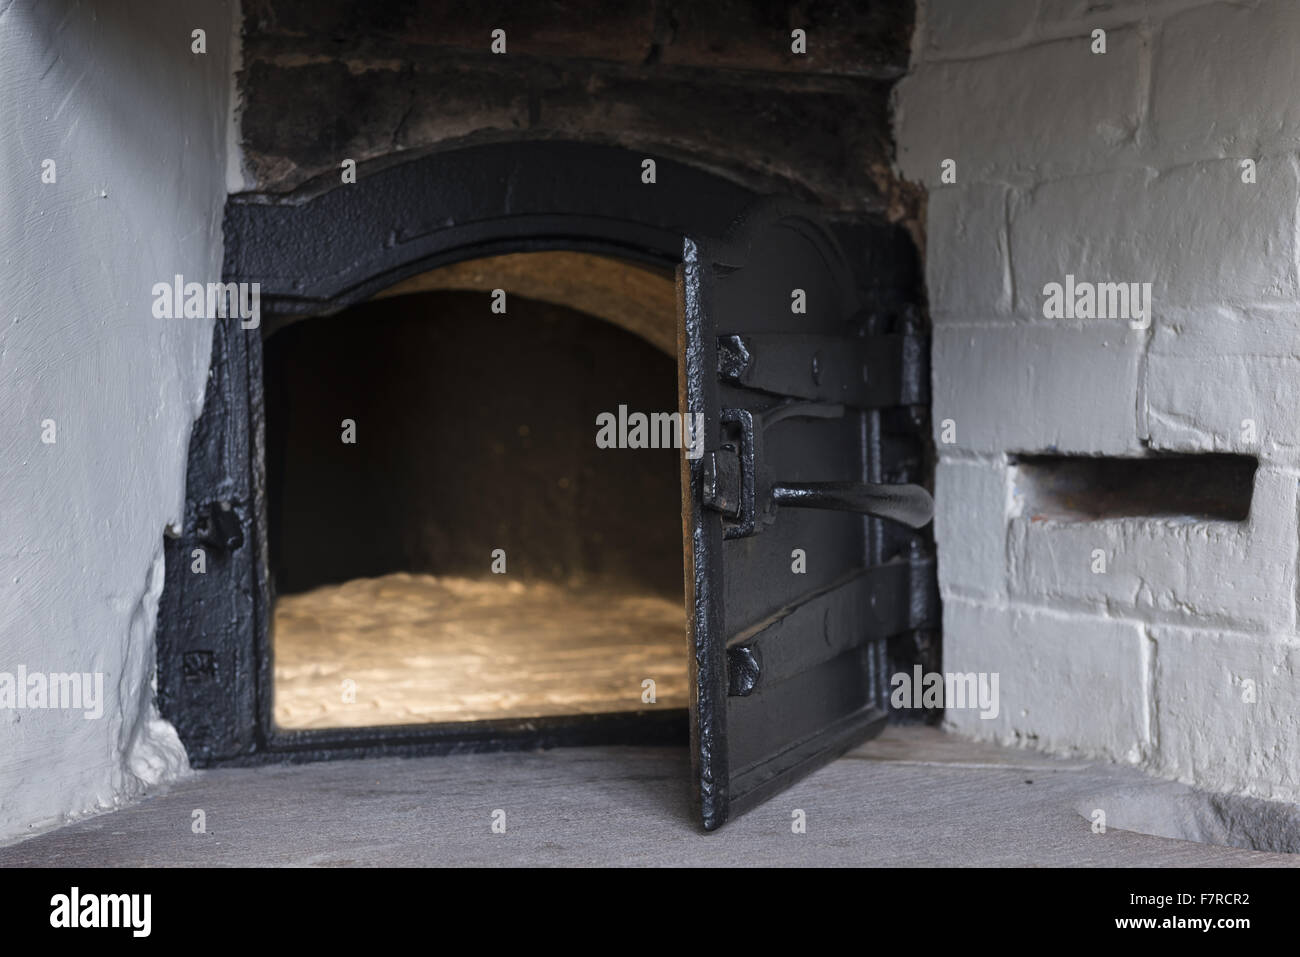 View into the bread oven in the Still Room at Hardwick Hall, Derbyshire. Hardwick Hall was built in the late 16th century for Bess of Hardwick. Stock Photo